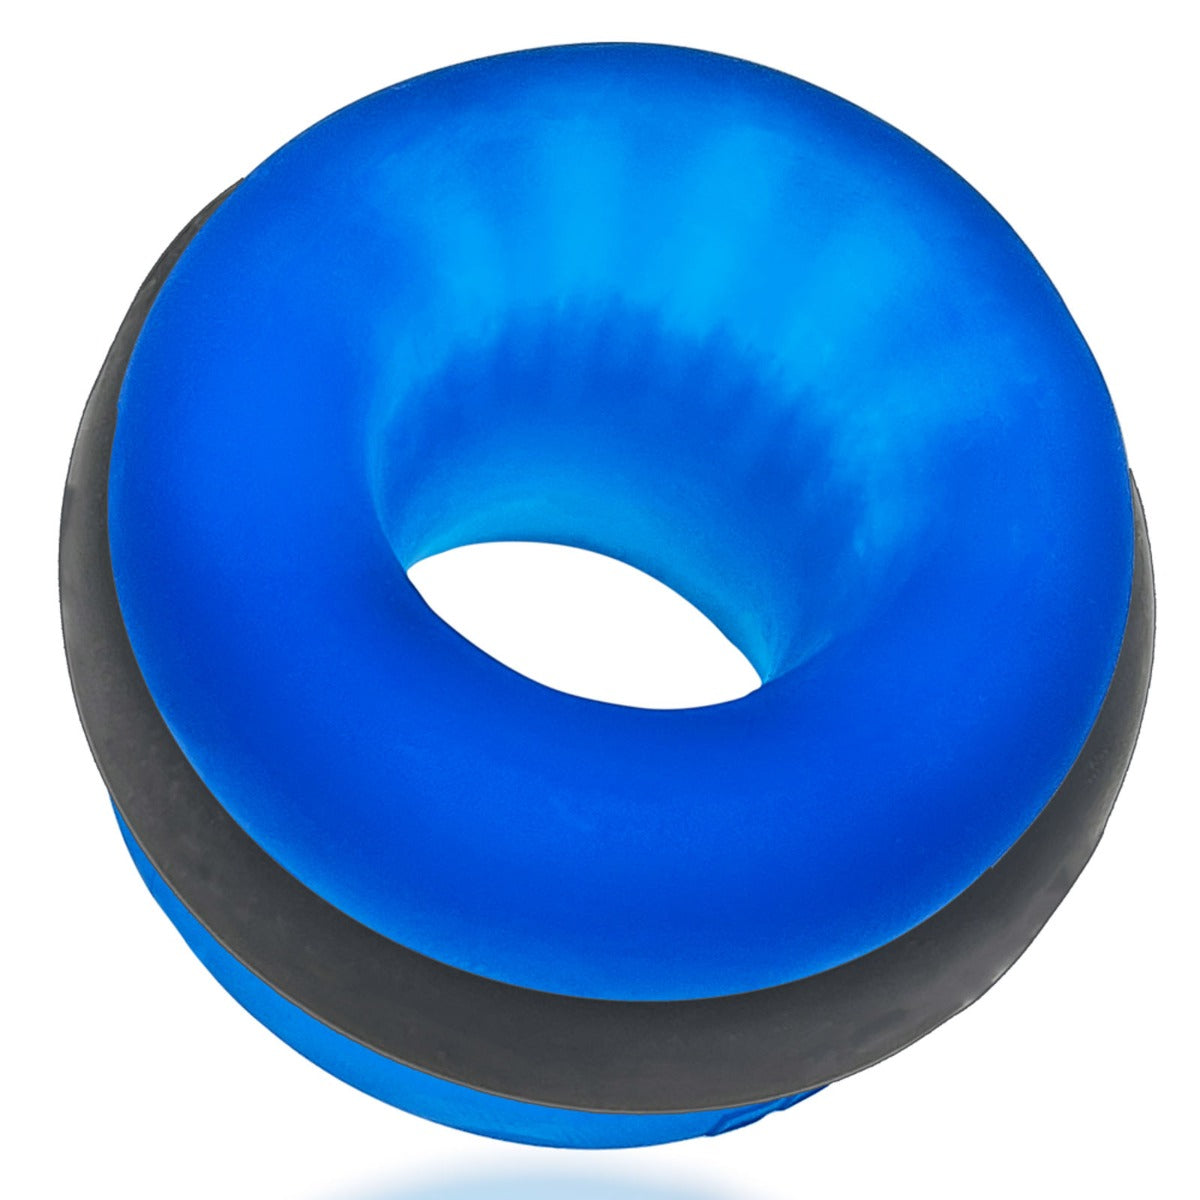 "Ultracore Ballstretcher with Axis Ring Blue Ice" (8070681460975)